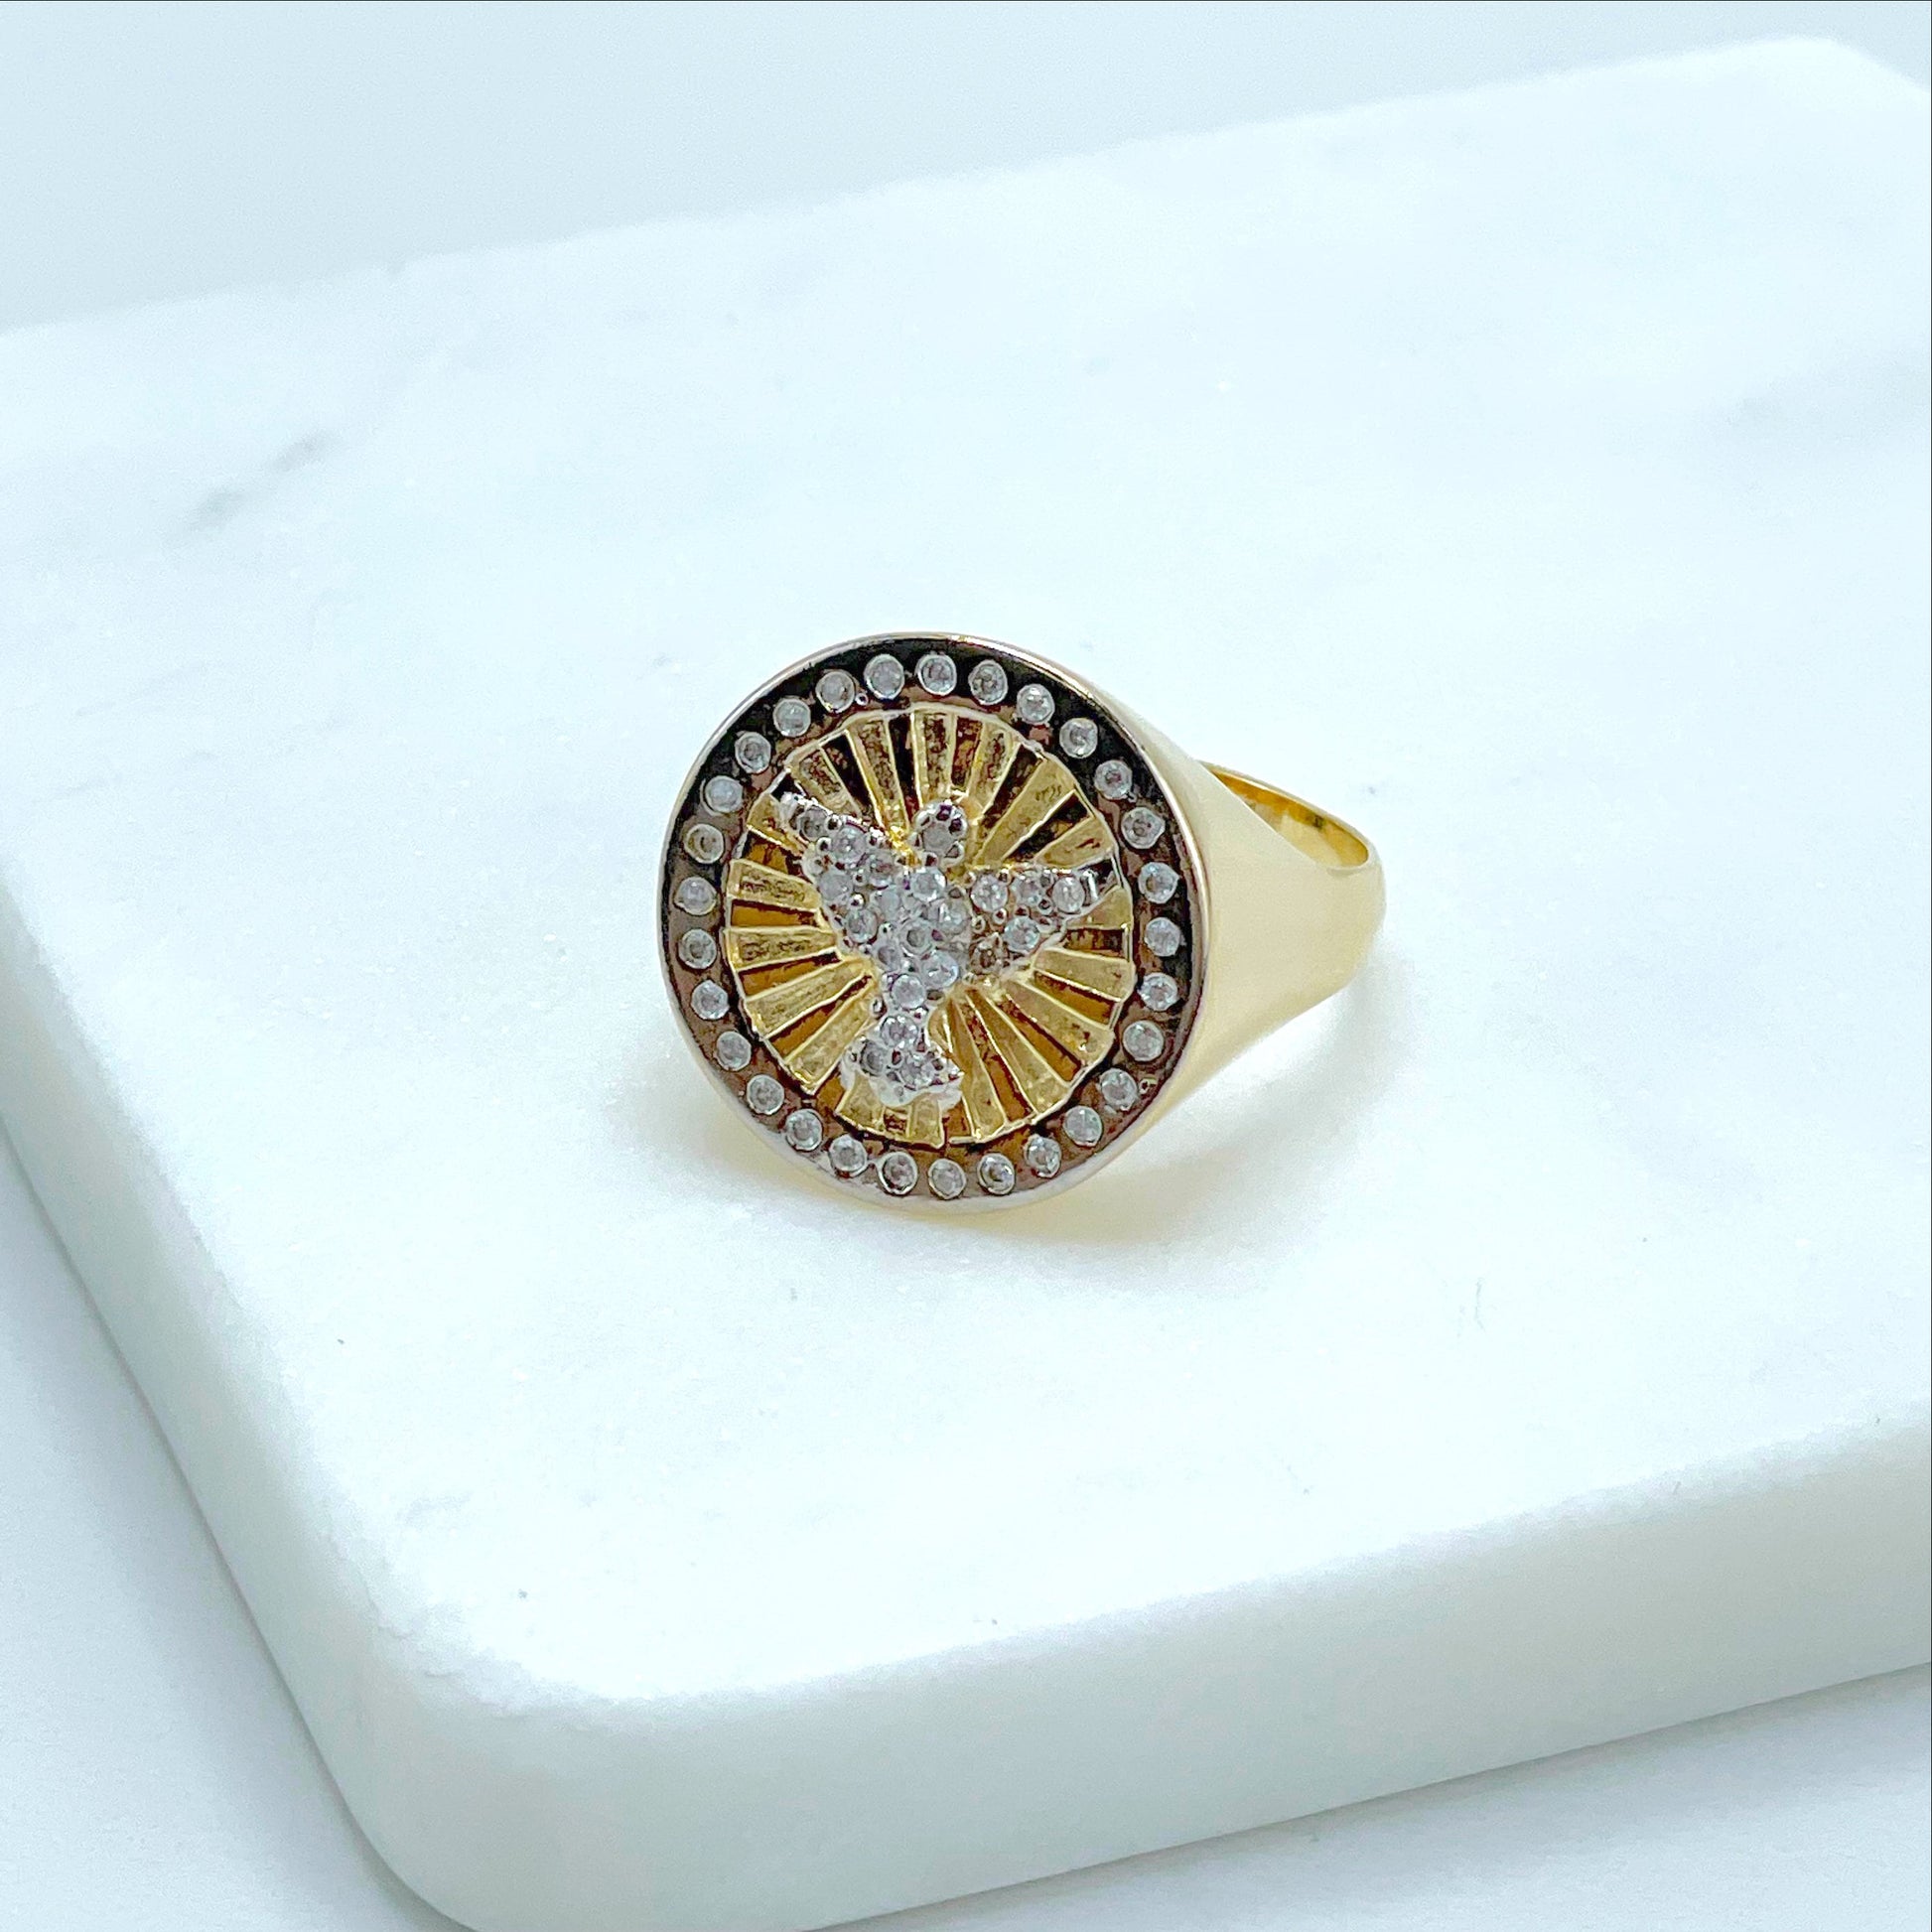 Mens Ring 18k Gold Filled With Micro Cubic Zirconia and Silver Filled Bird,  Wholesale Jewelry Supplies